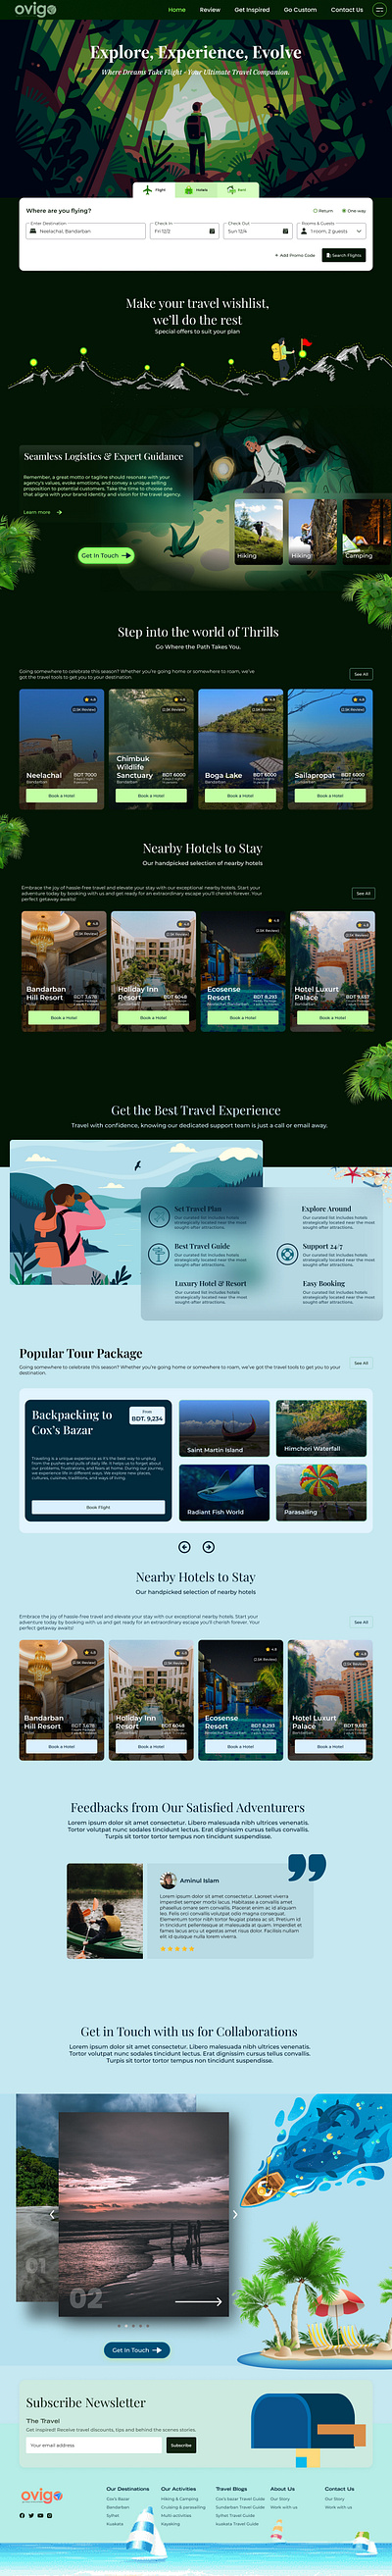 Travel Agency Landing Page UI adventure agency booking design forest green landing page tour travel ui